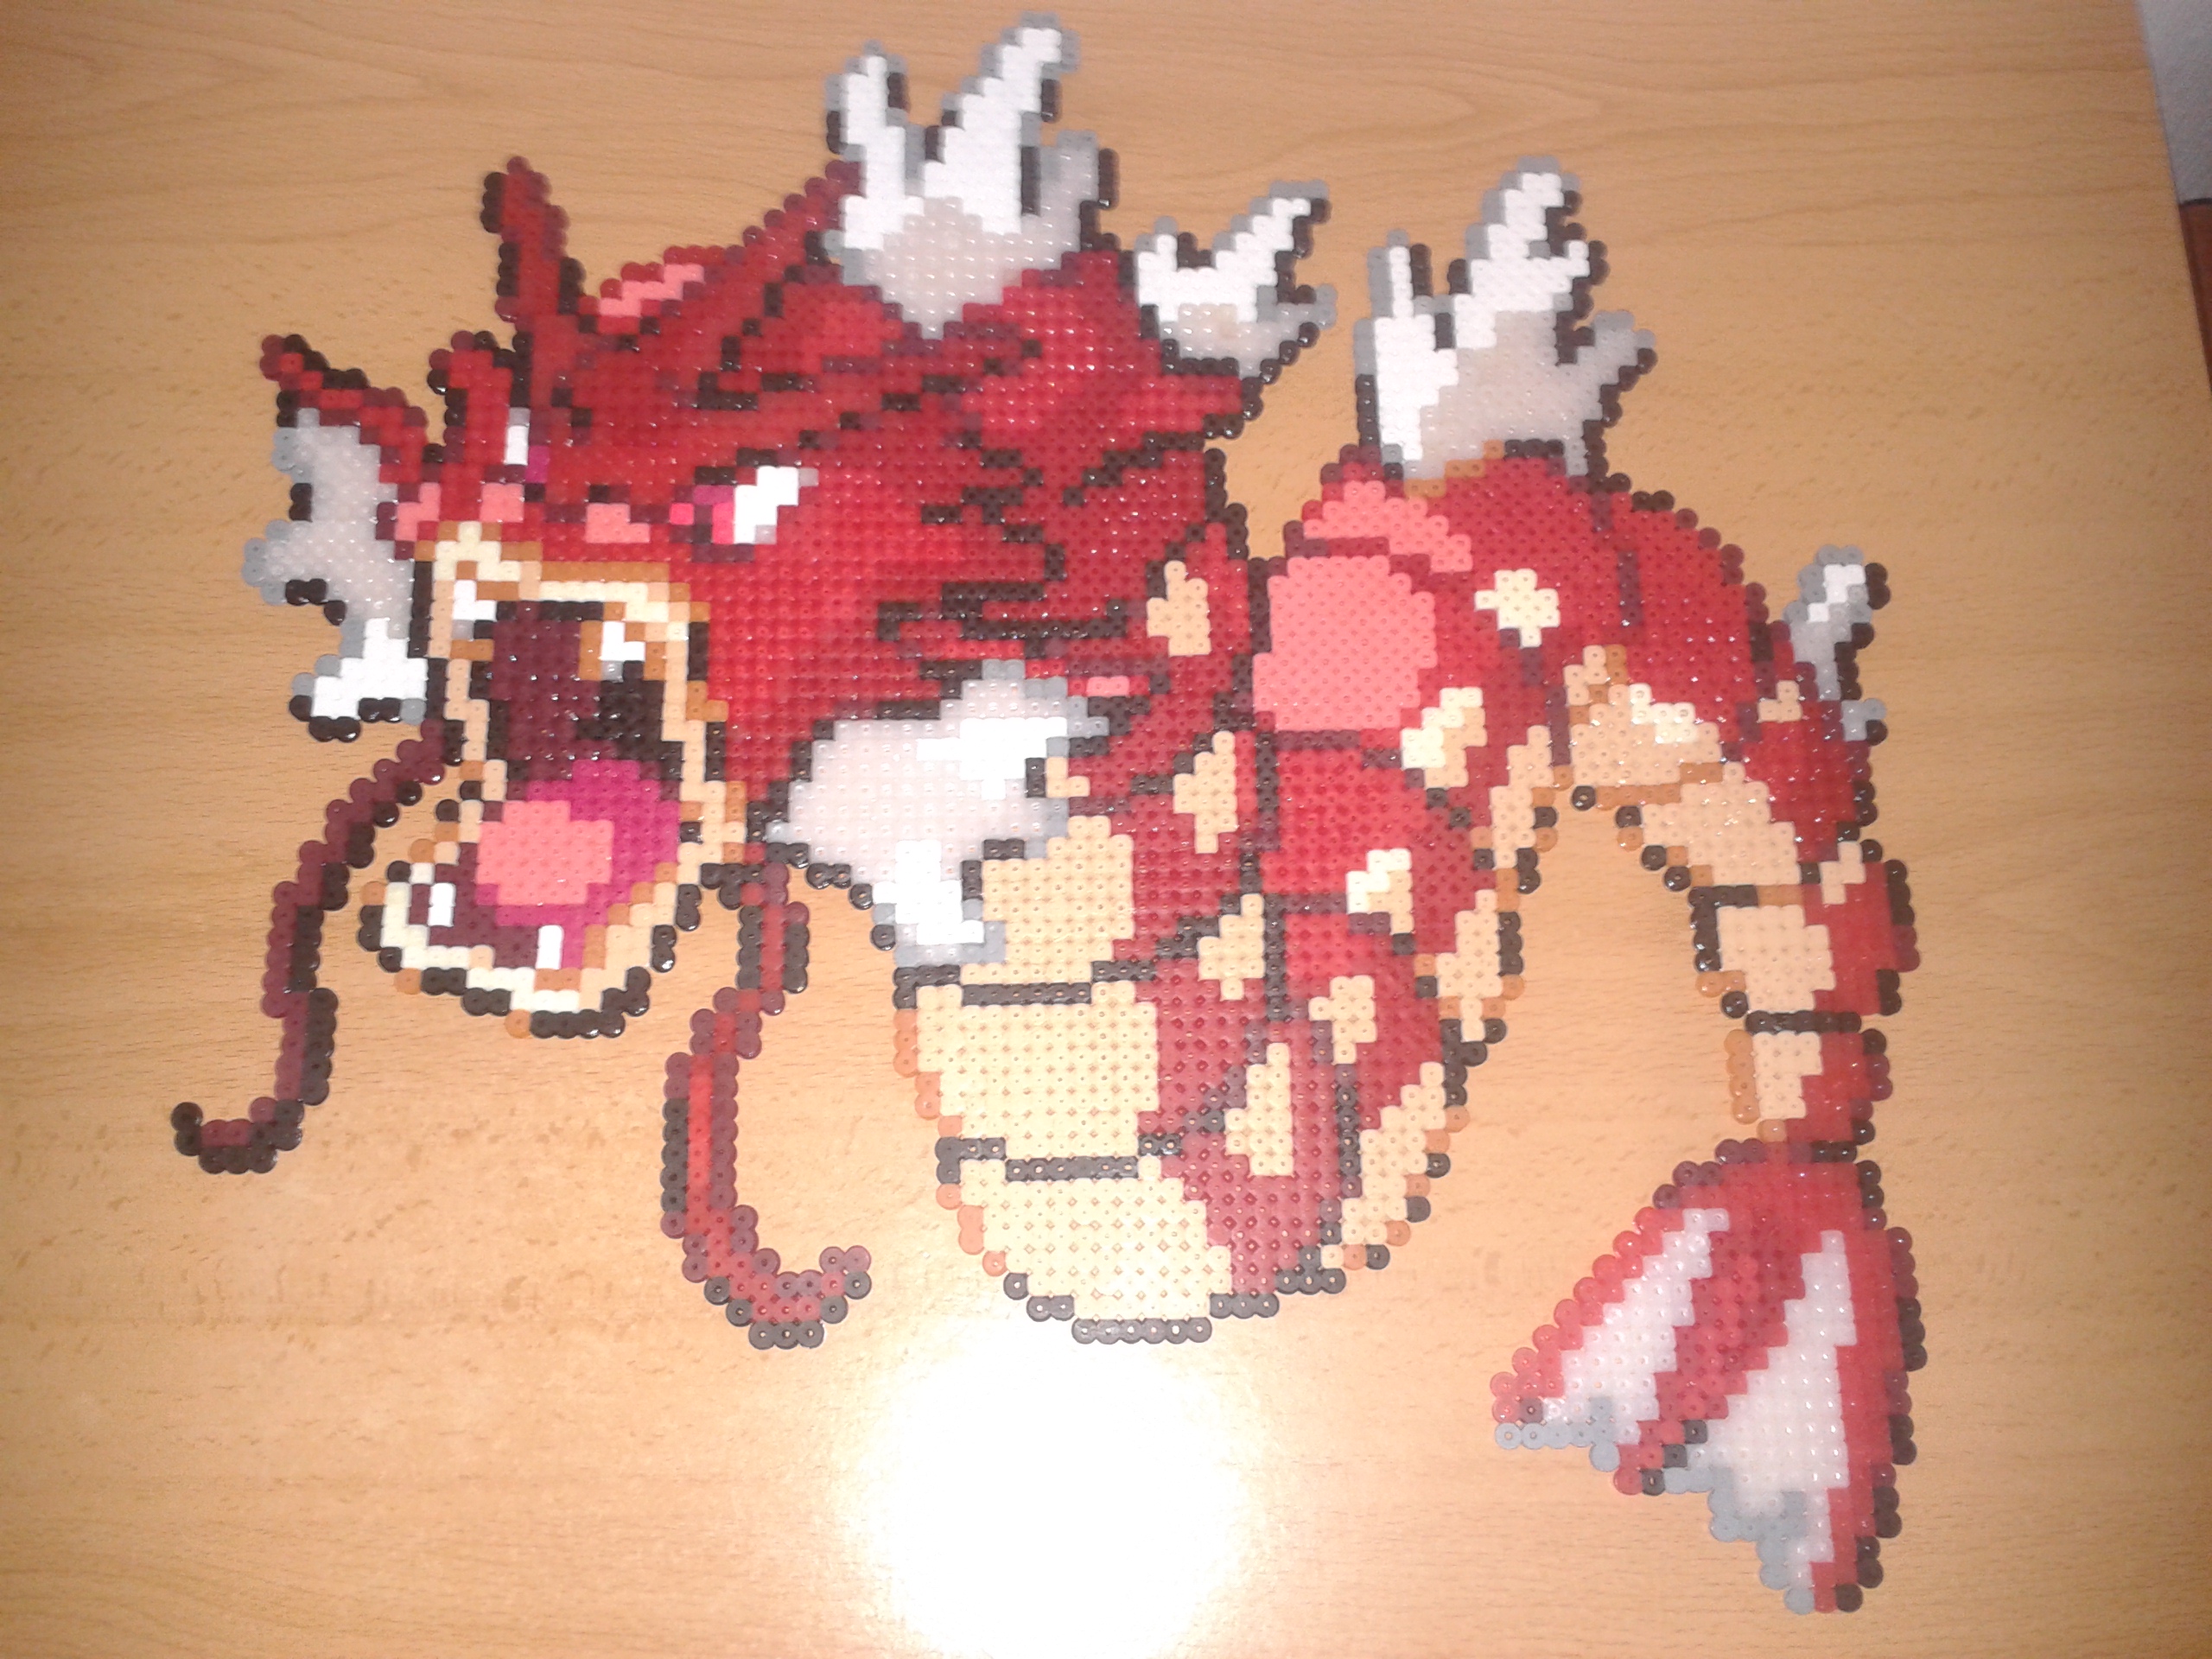 Hama Pokemon Red Blue Gold by nickquivooy on DeviantArt